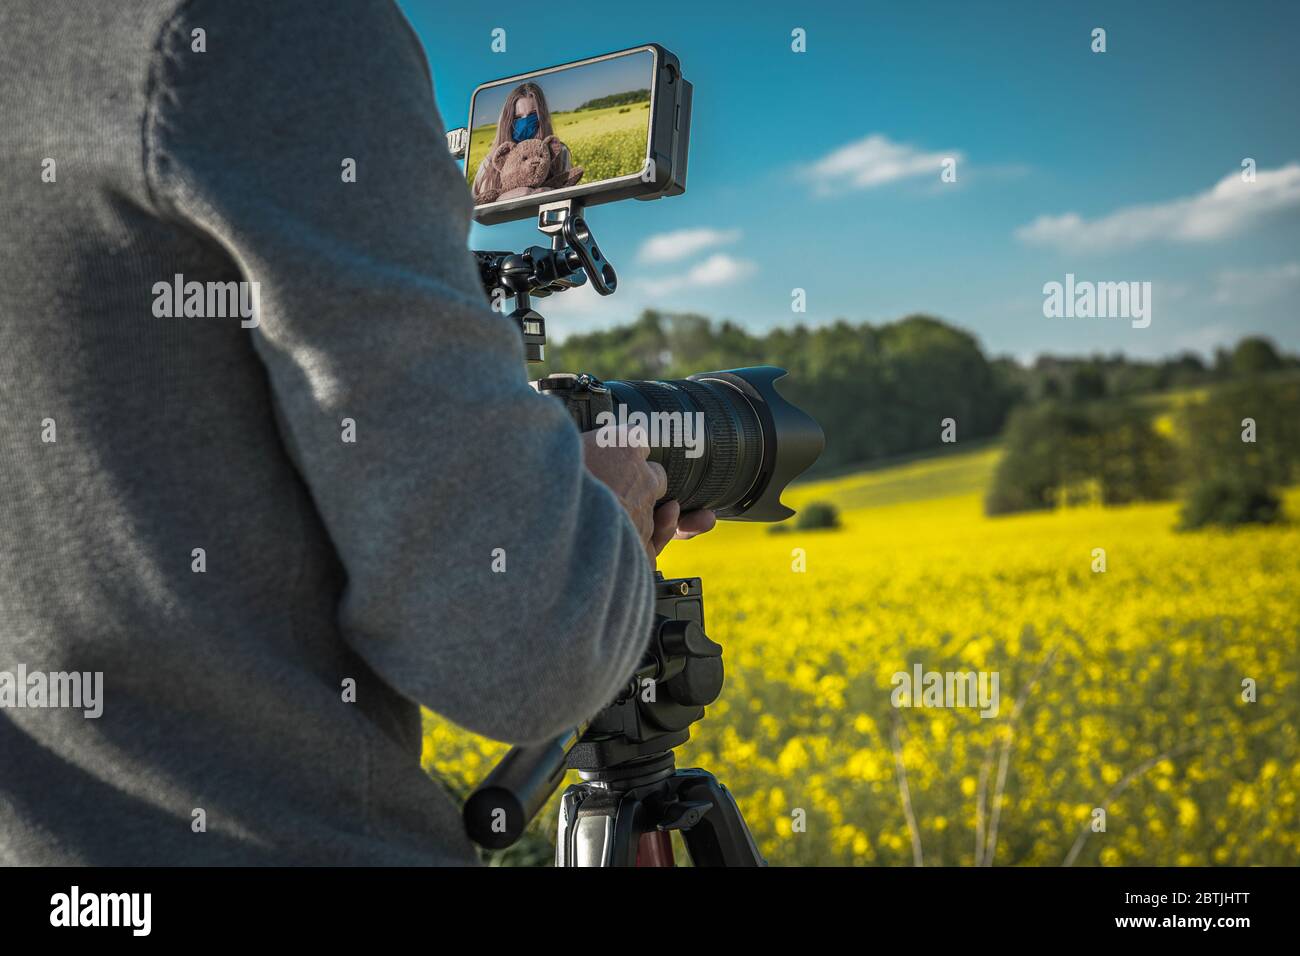 Outdoor Film Making with Digital Camera. Videographer Taking Shots of Caucasian Girl with Scenic Colorful Landscape in the Background. Modern Digital Stock Photo